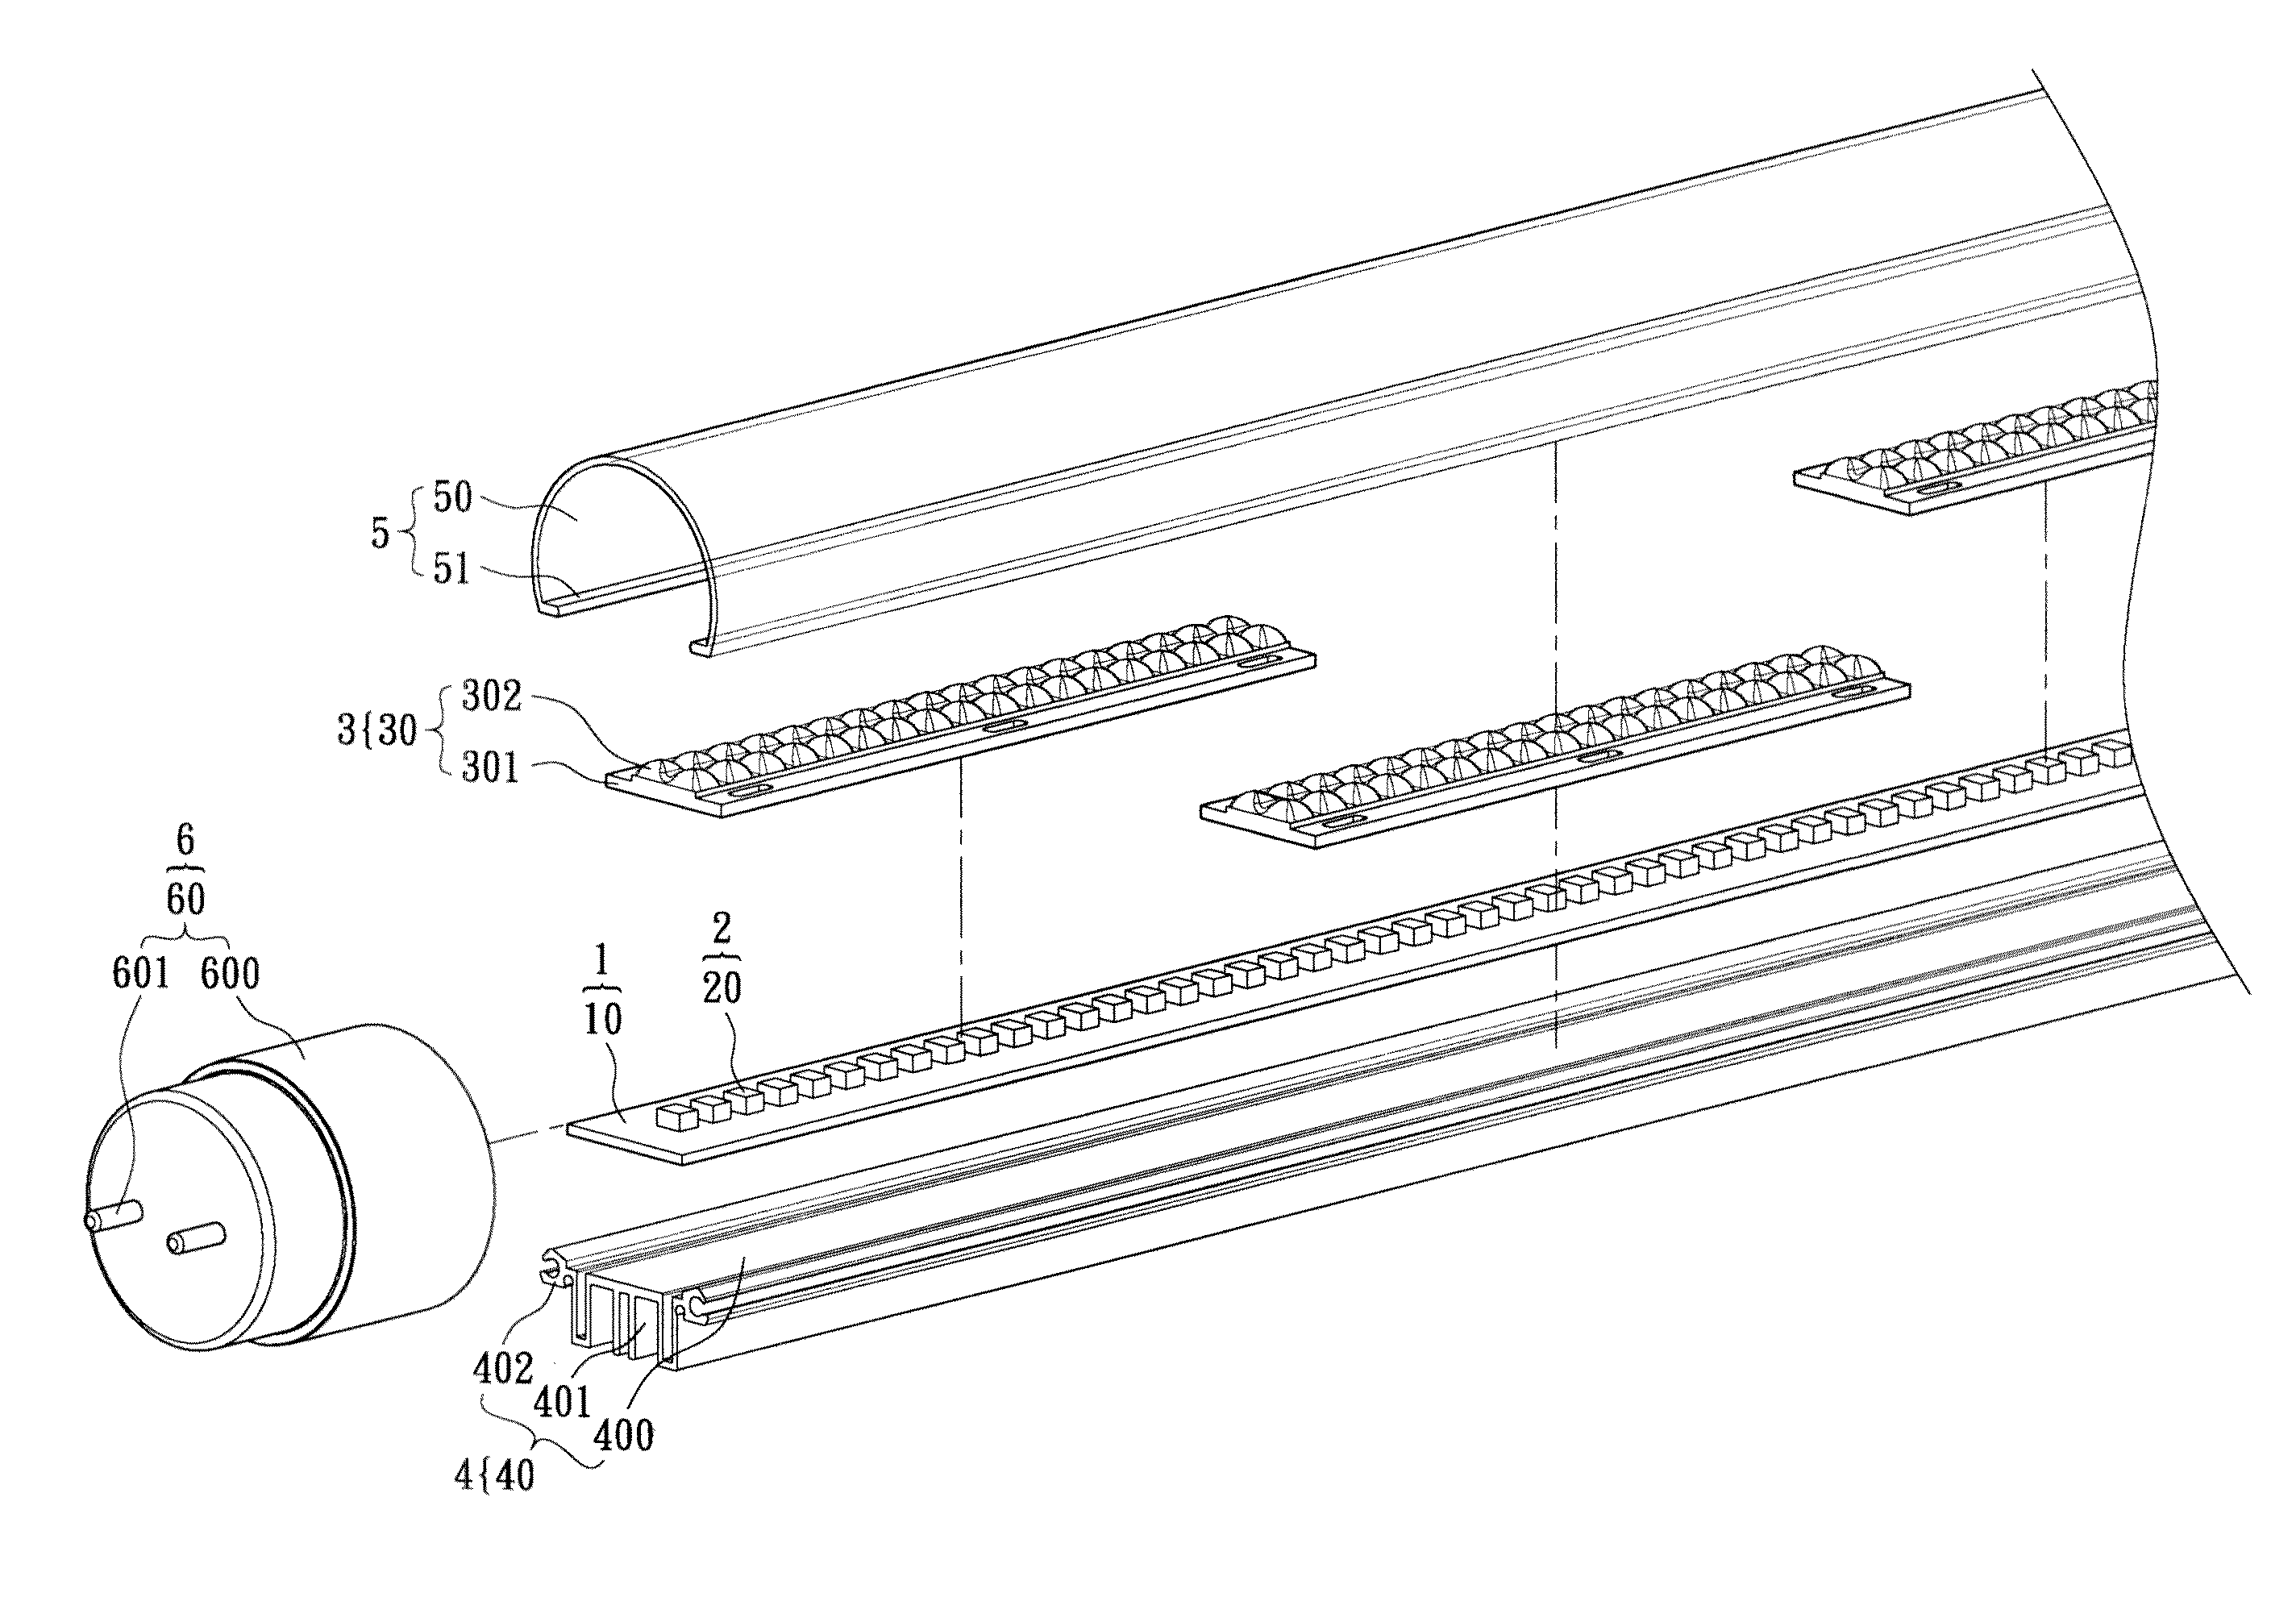 Illumination structure and lamp tube structure for generating specific directional light sources